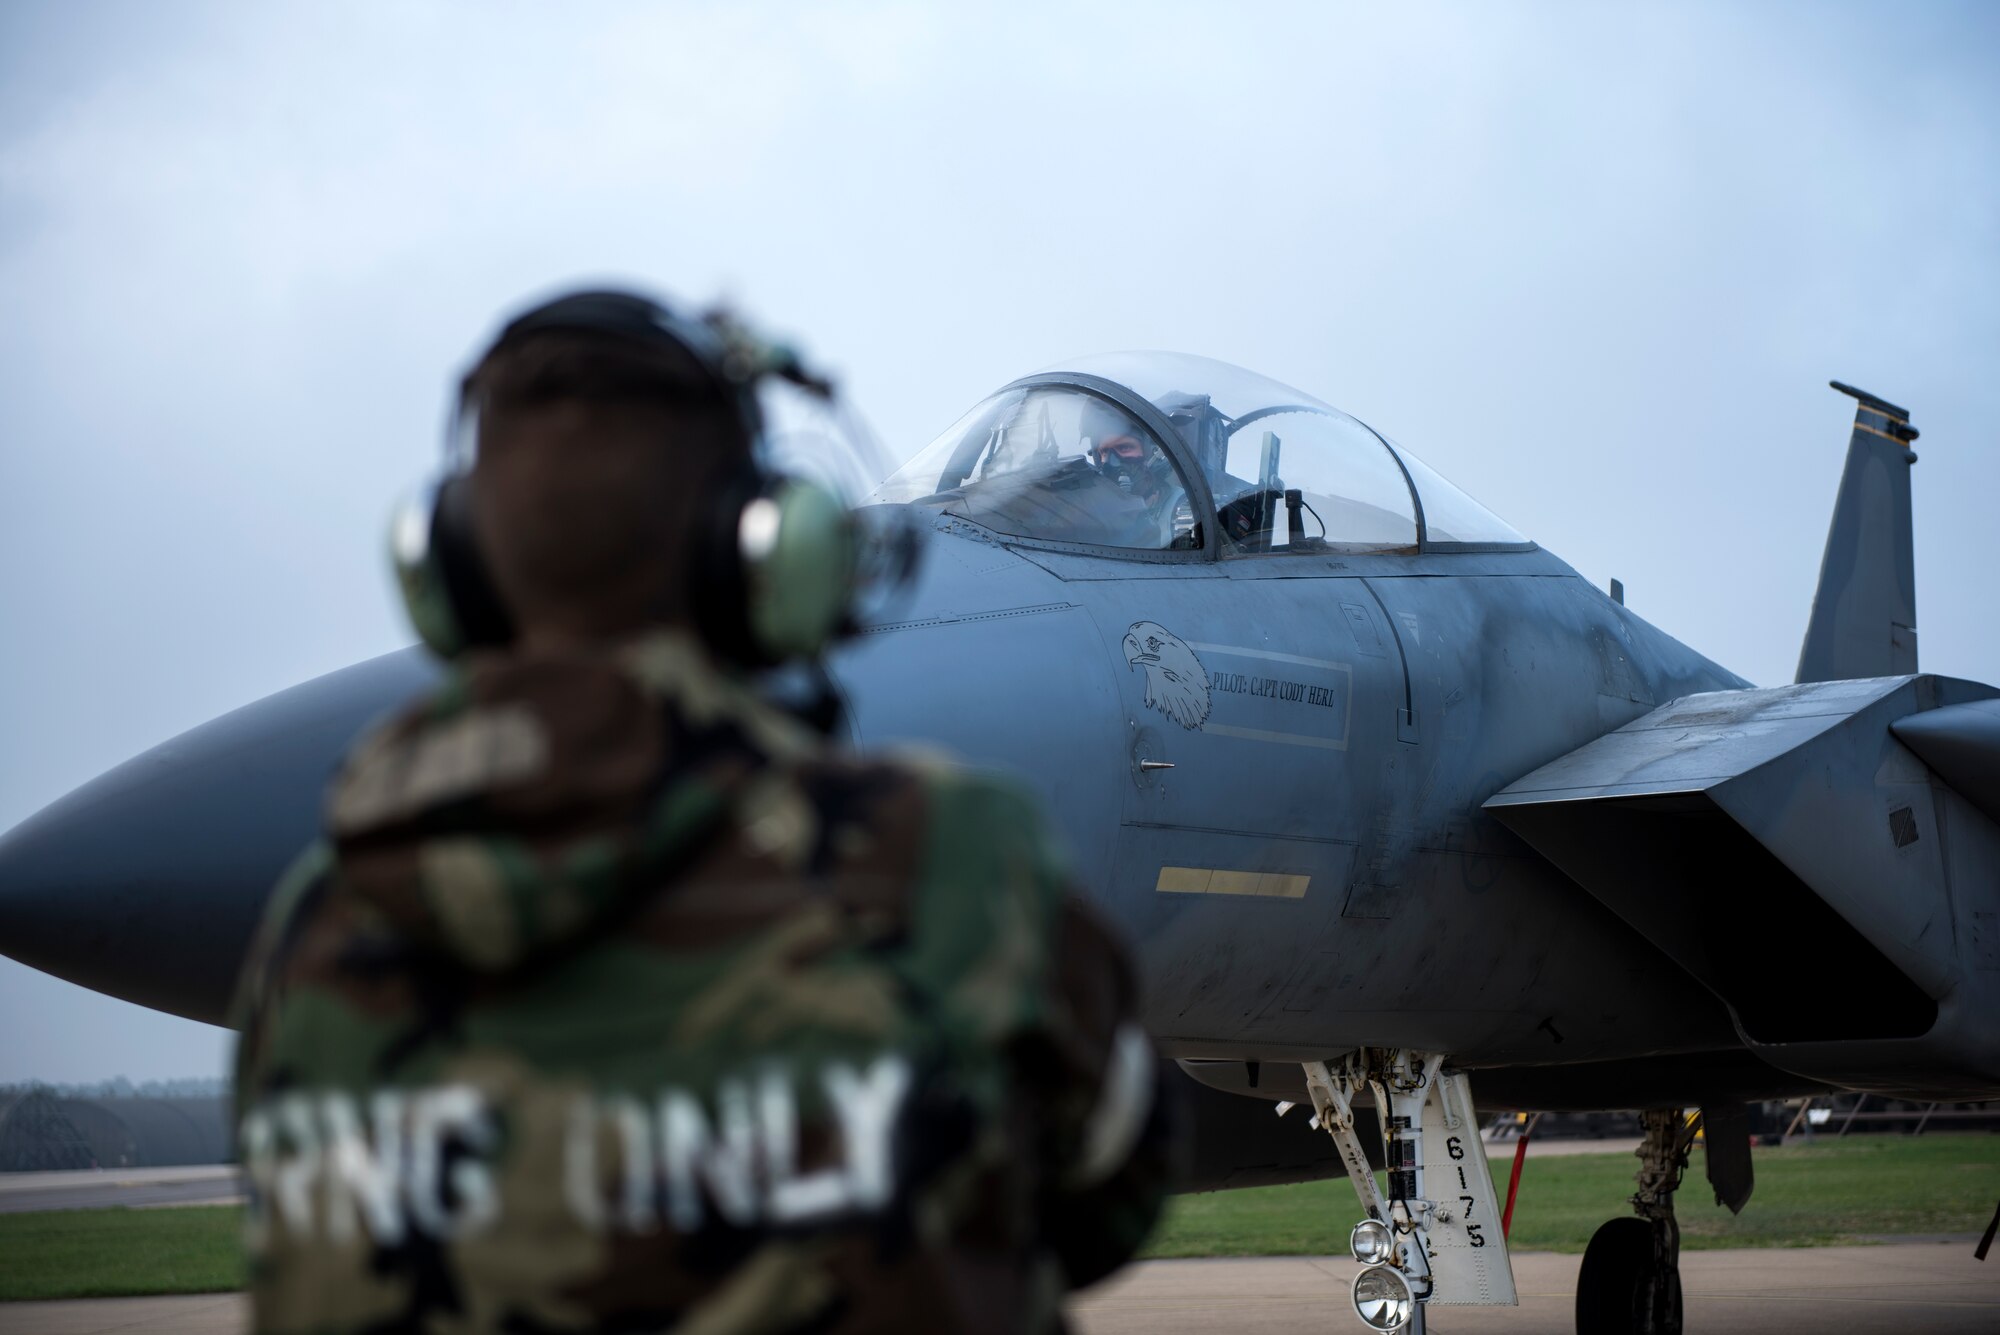 An Airman assigned to the 48th Maintenance Group prepares an F-15C Eagle for a sortie while in Mission Oriented Protective Posture gear during Combat Thursday at Royal Air Force Lakenheath, England, Sept. 6, 2018. Combat Thursday is a newly instituted program developed to familiarize military members with MOPP equipment and procedures, to perform daily operations in any environment. (U.S. Air Force photo/Senior Airman Malcolm Mayfield)